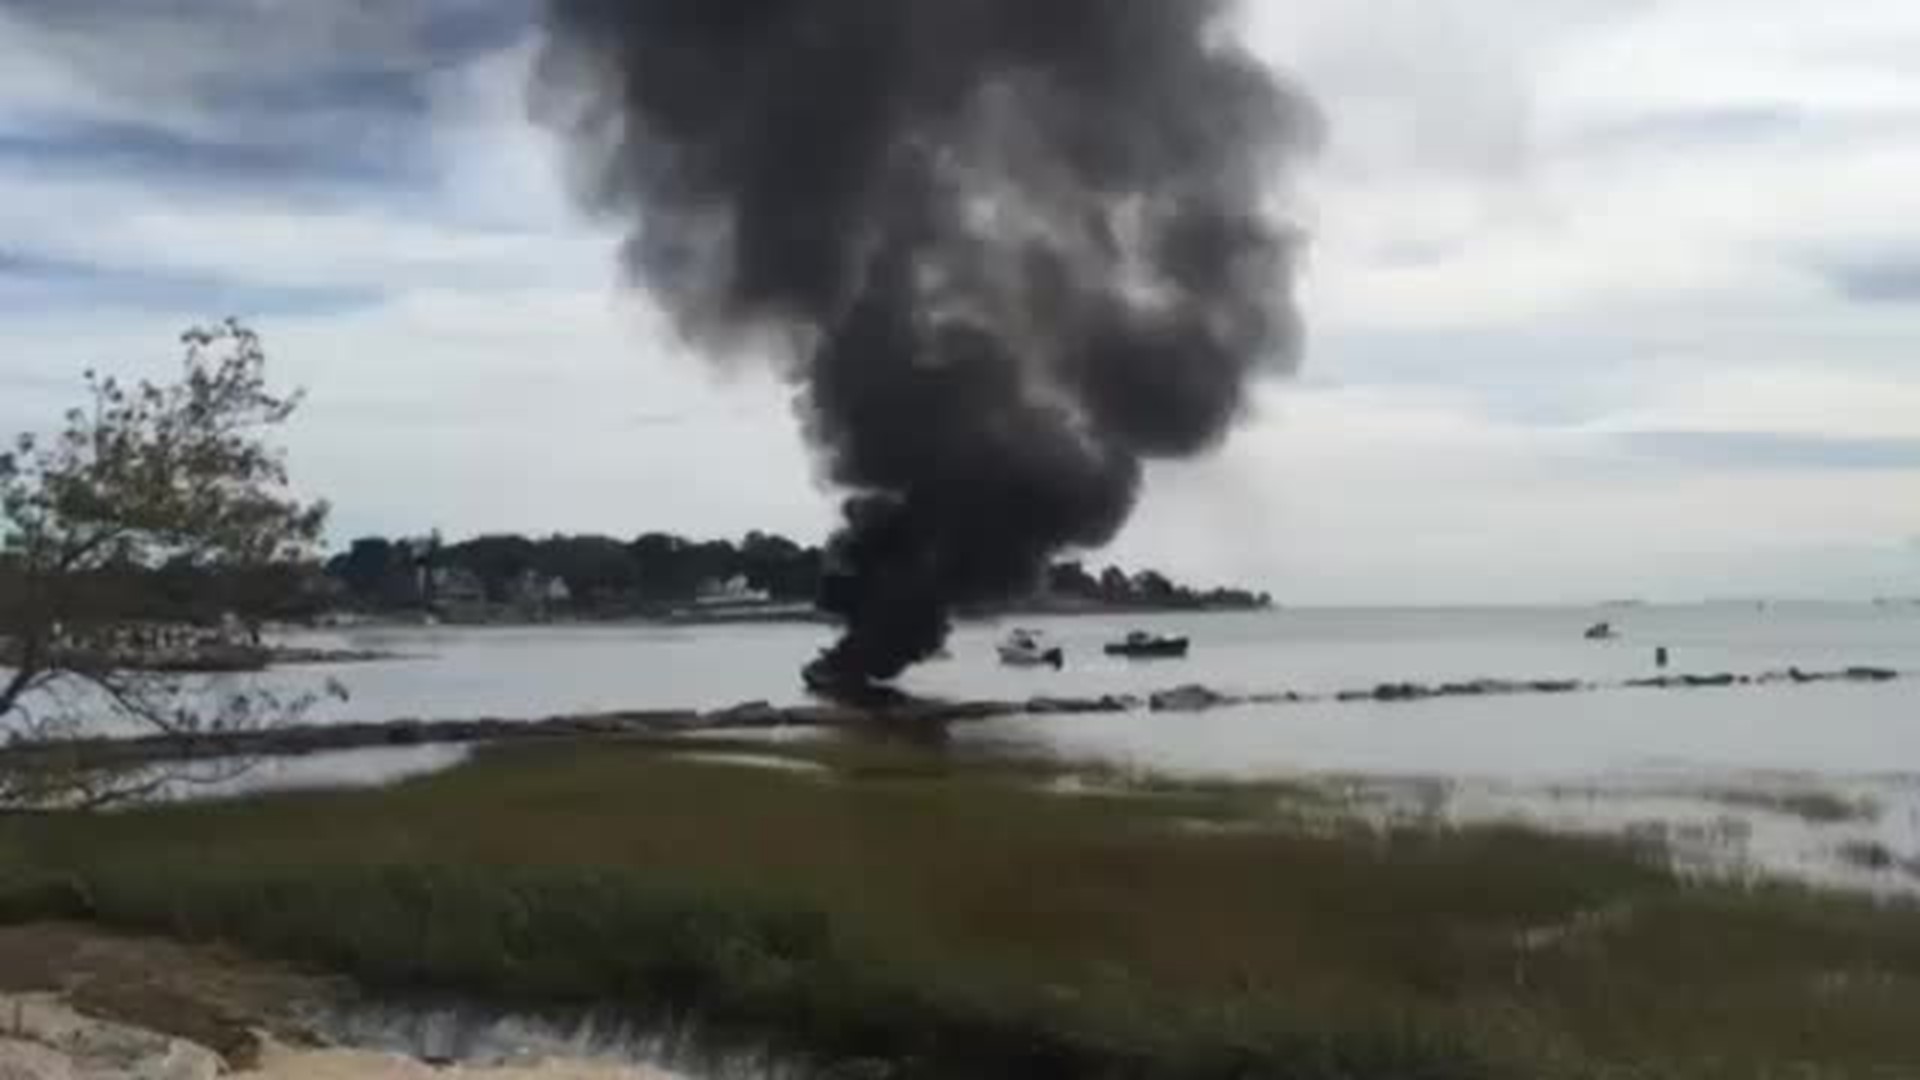 Milford Boat Fire